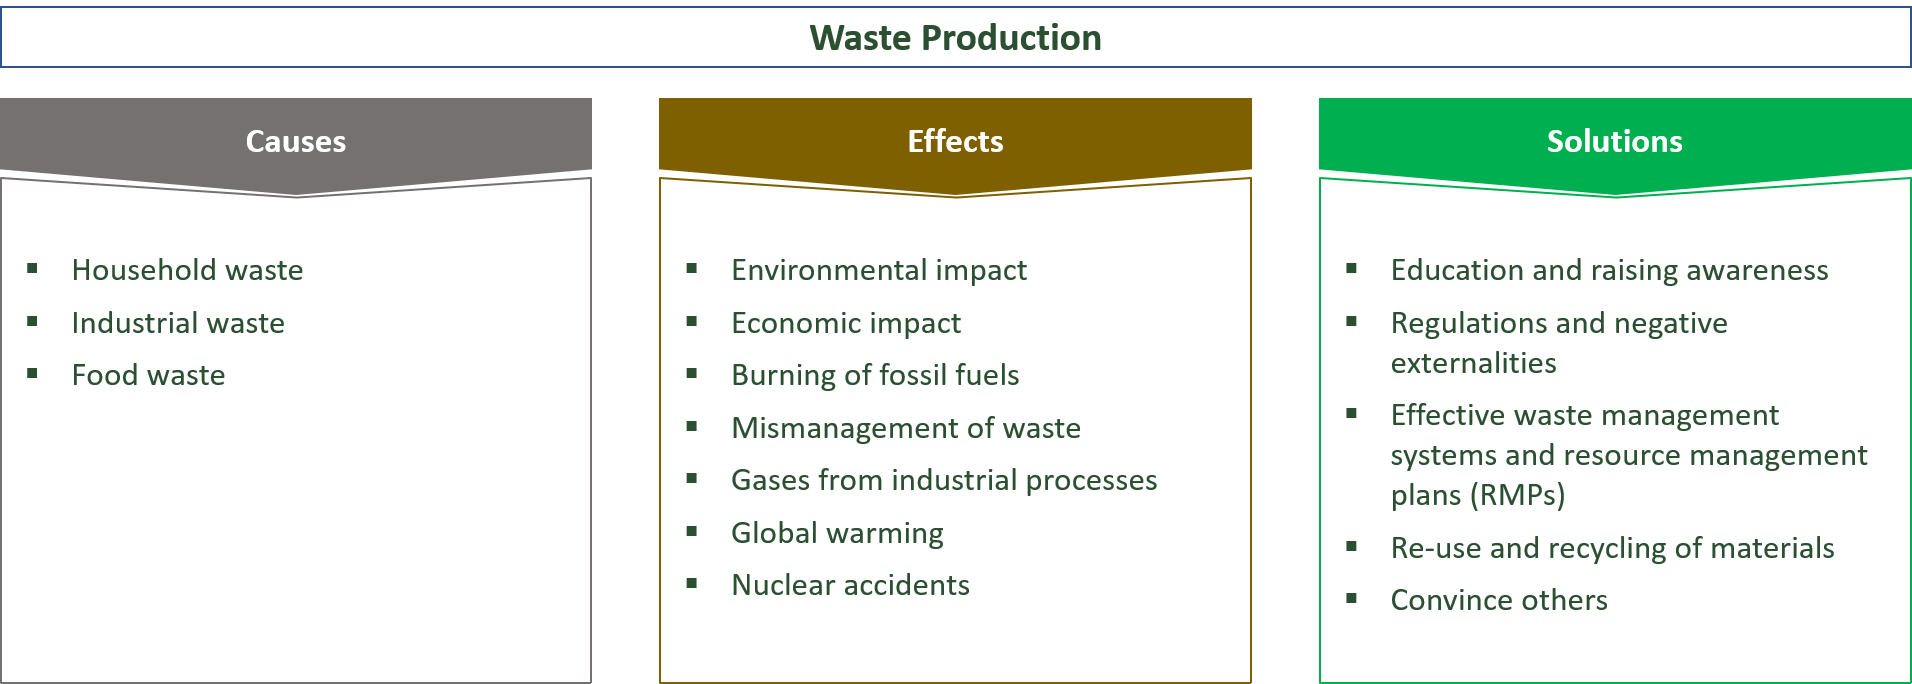 causes, effects and solutions for waste